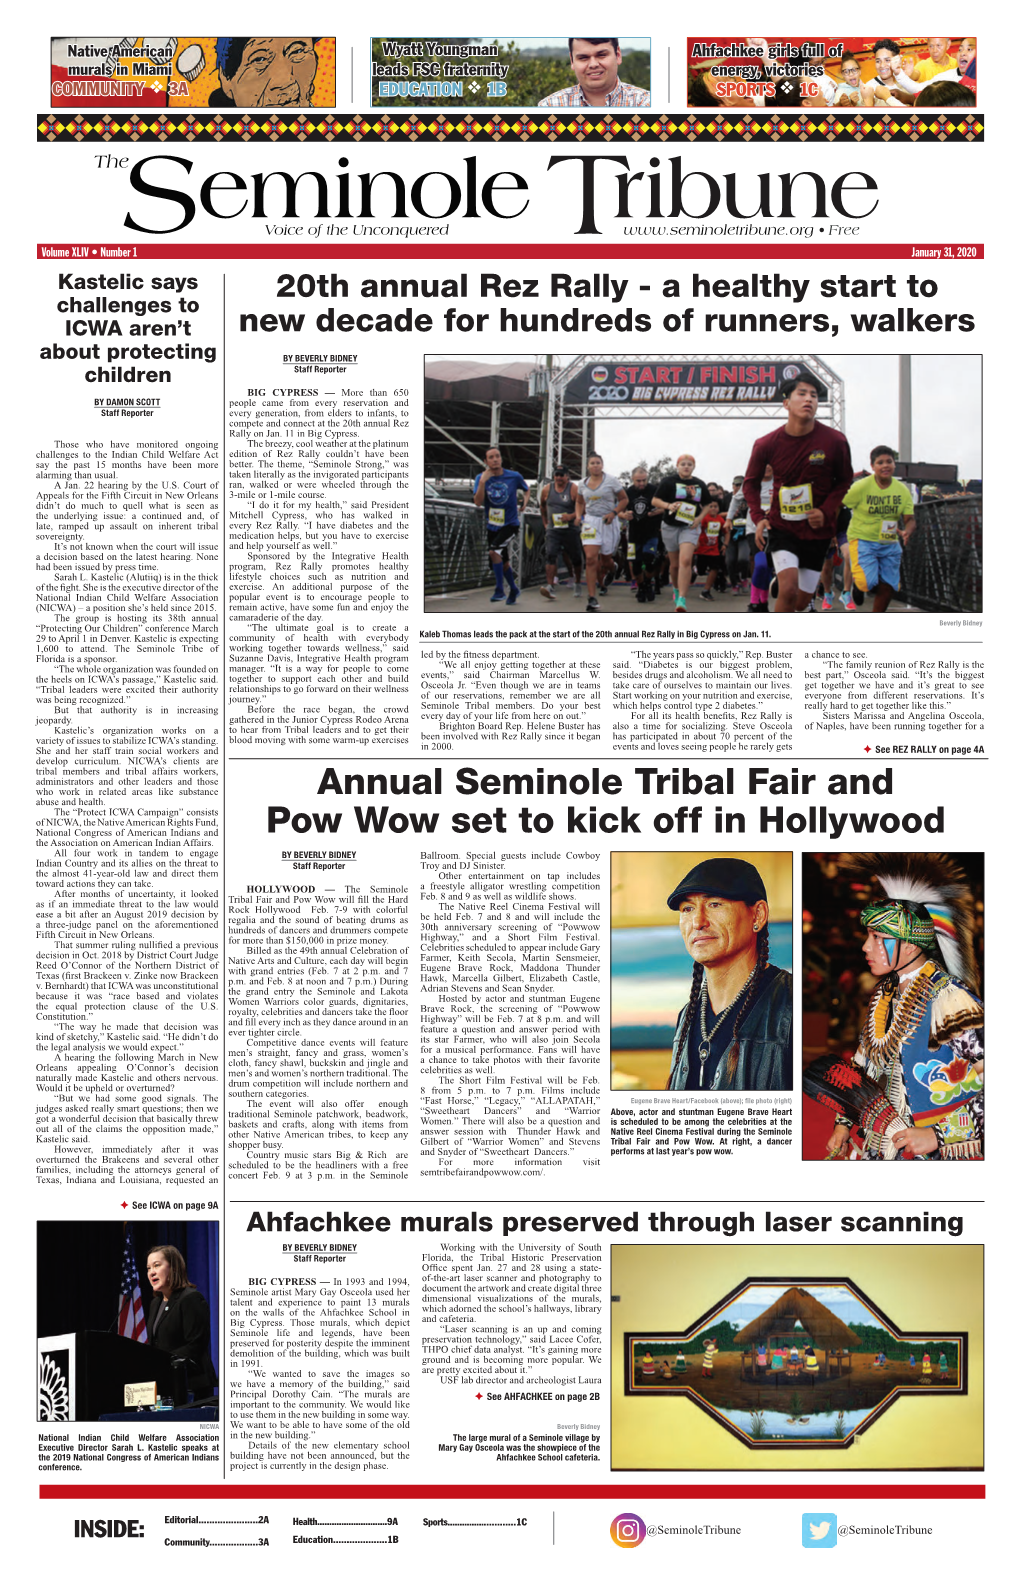 Annual Seminole Tribal Fair and Pow Wow Set to Kick Off in Hollywood